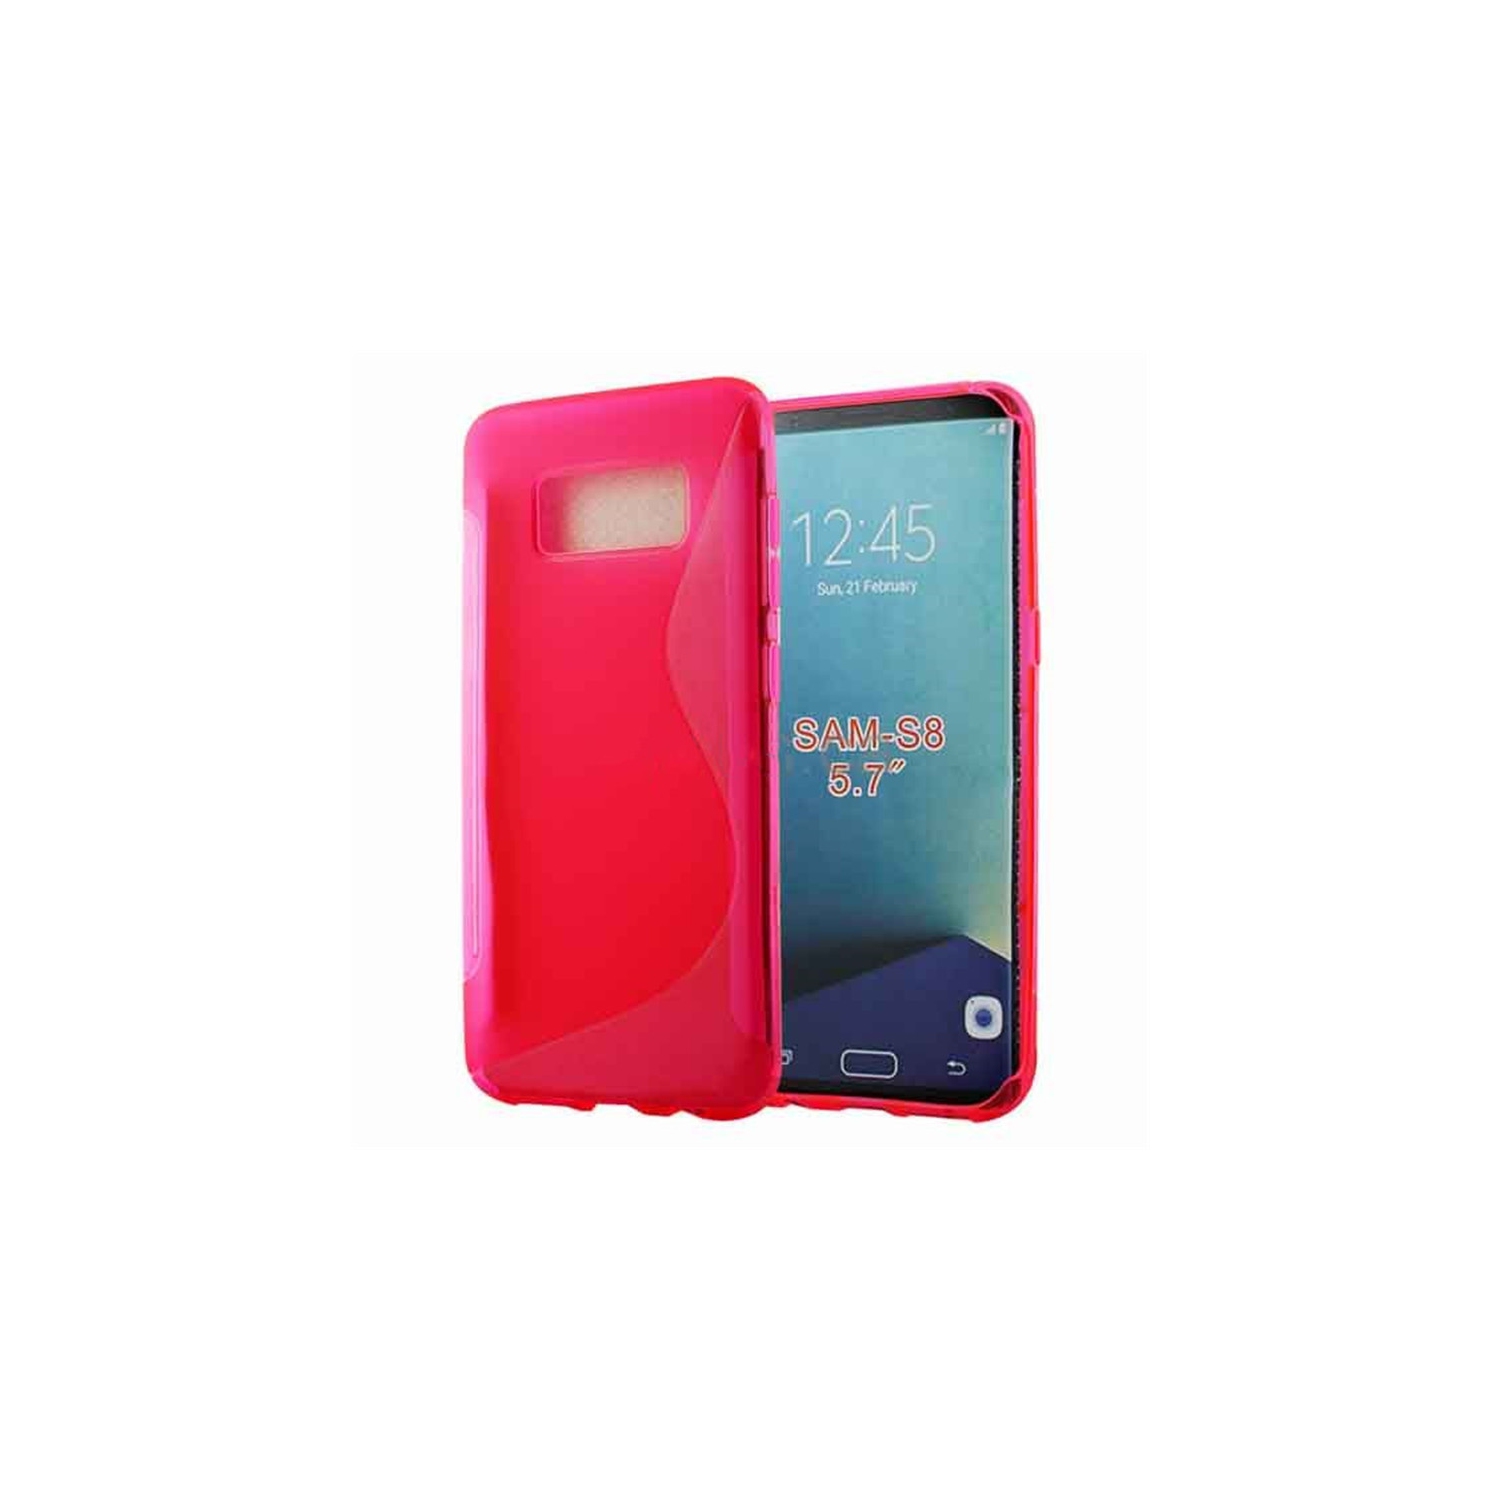 【CSmart】 Ultra Thin Soft TPU Silicone Jelly Bumper Back Cover Case for Samsung Galaxy S8, Hot Pink